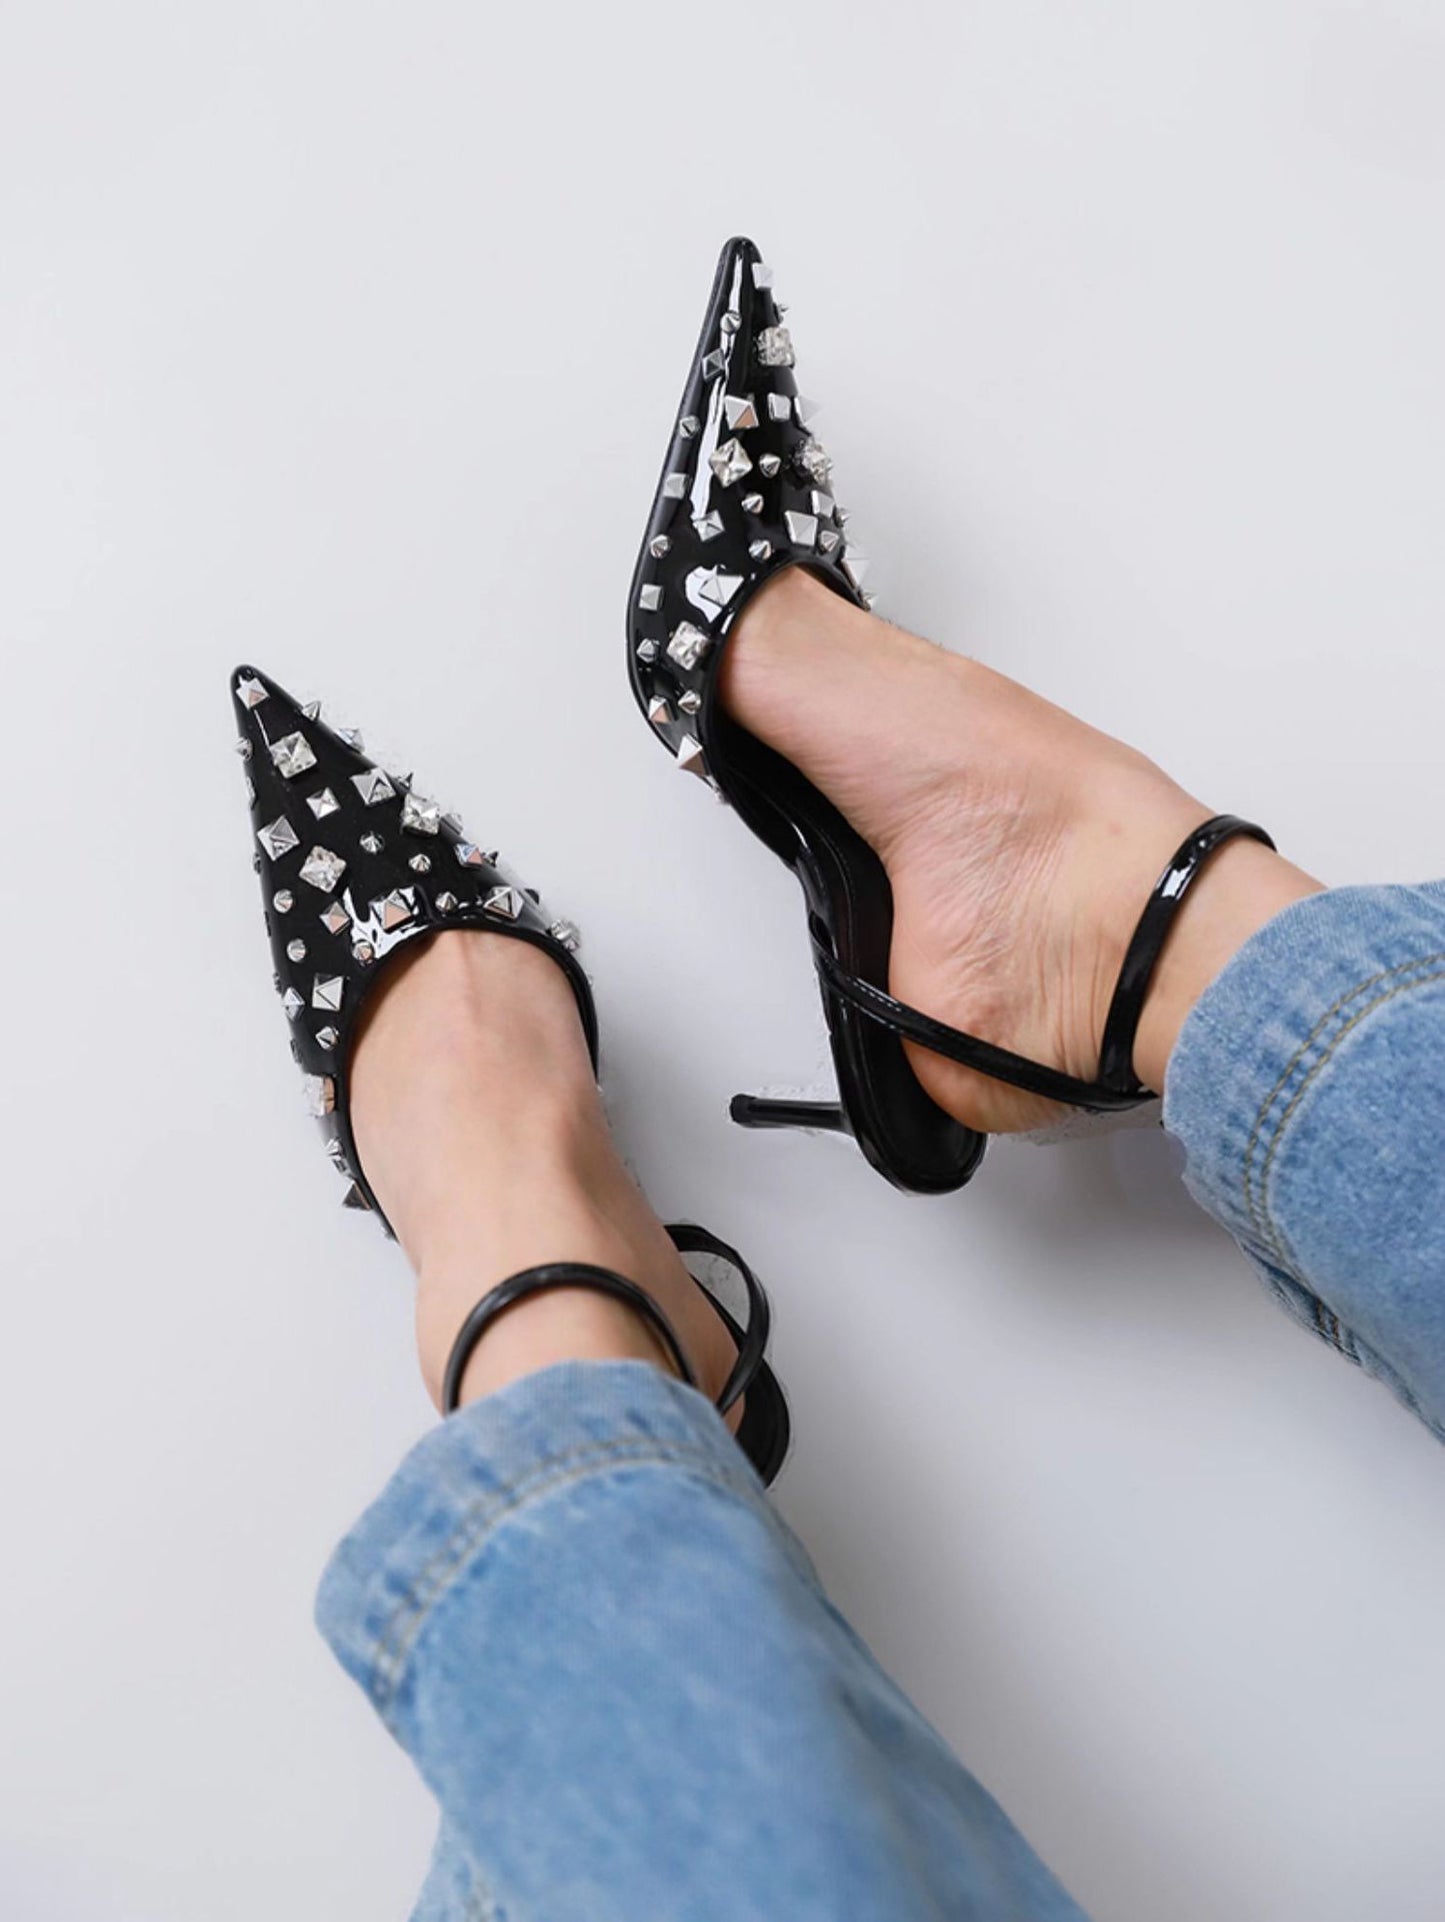 Studded Pointed -Toe Retro High Heels Pumps